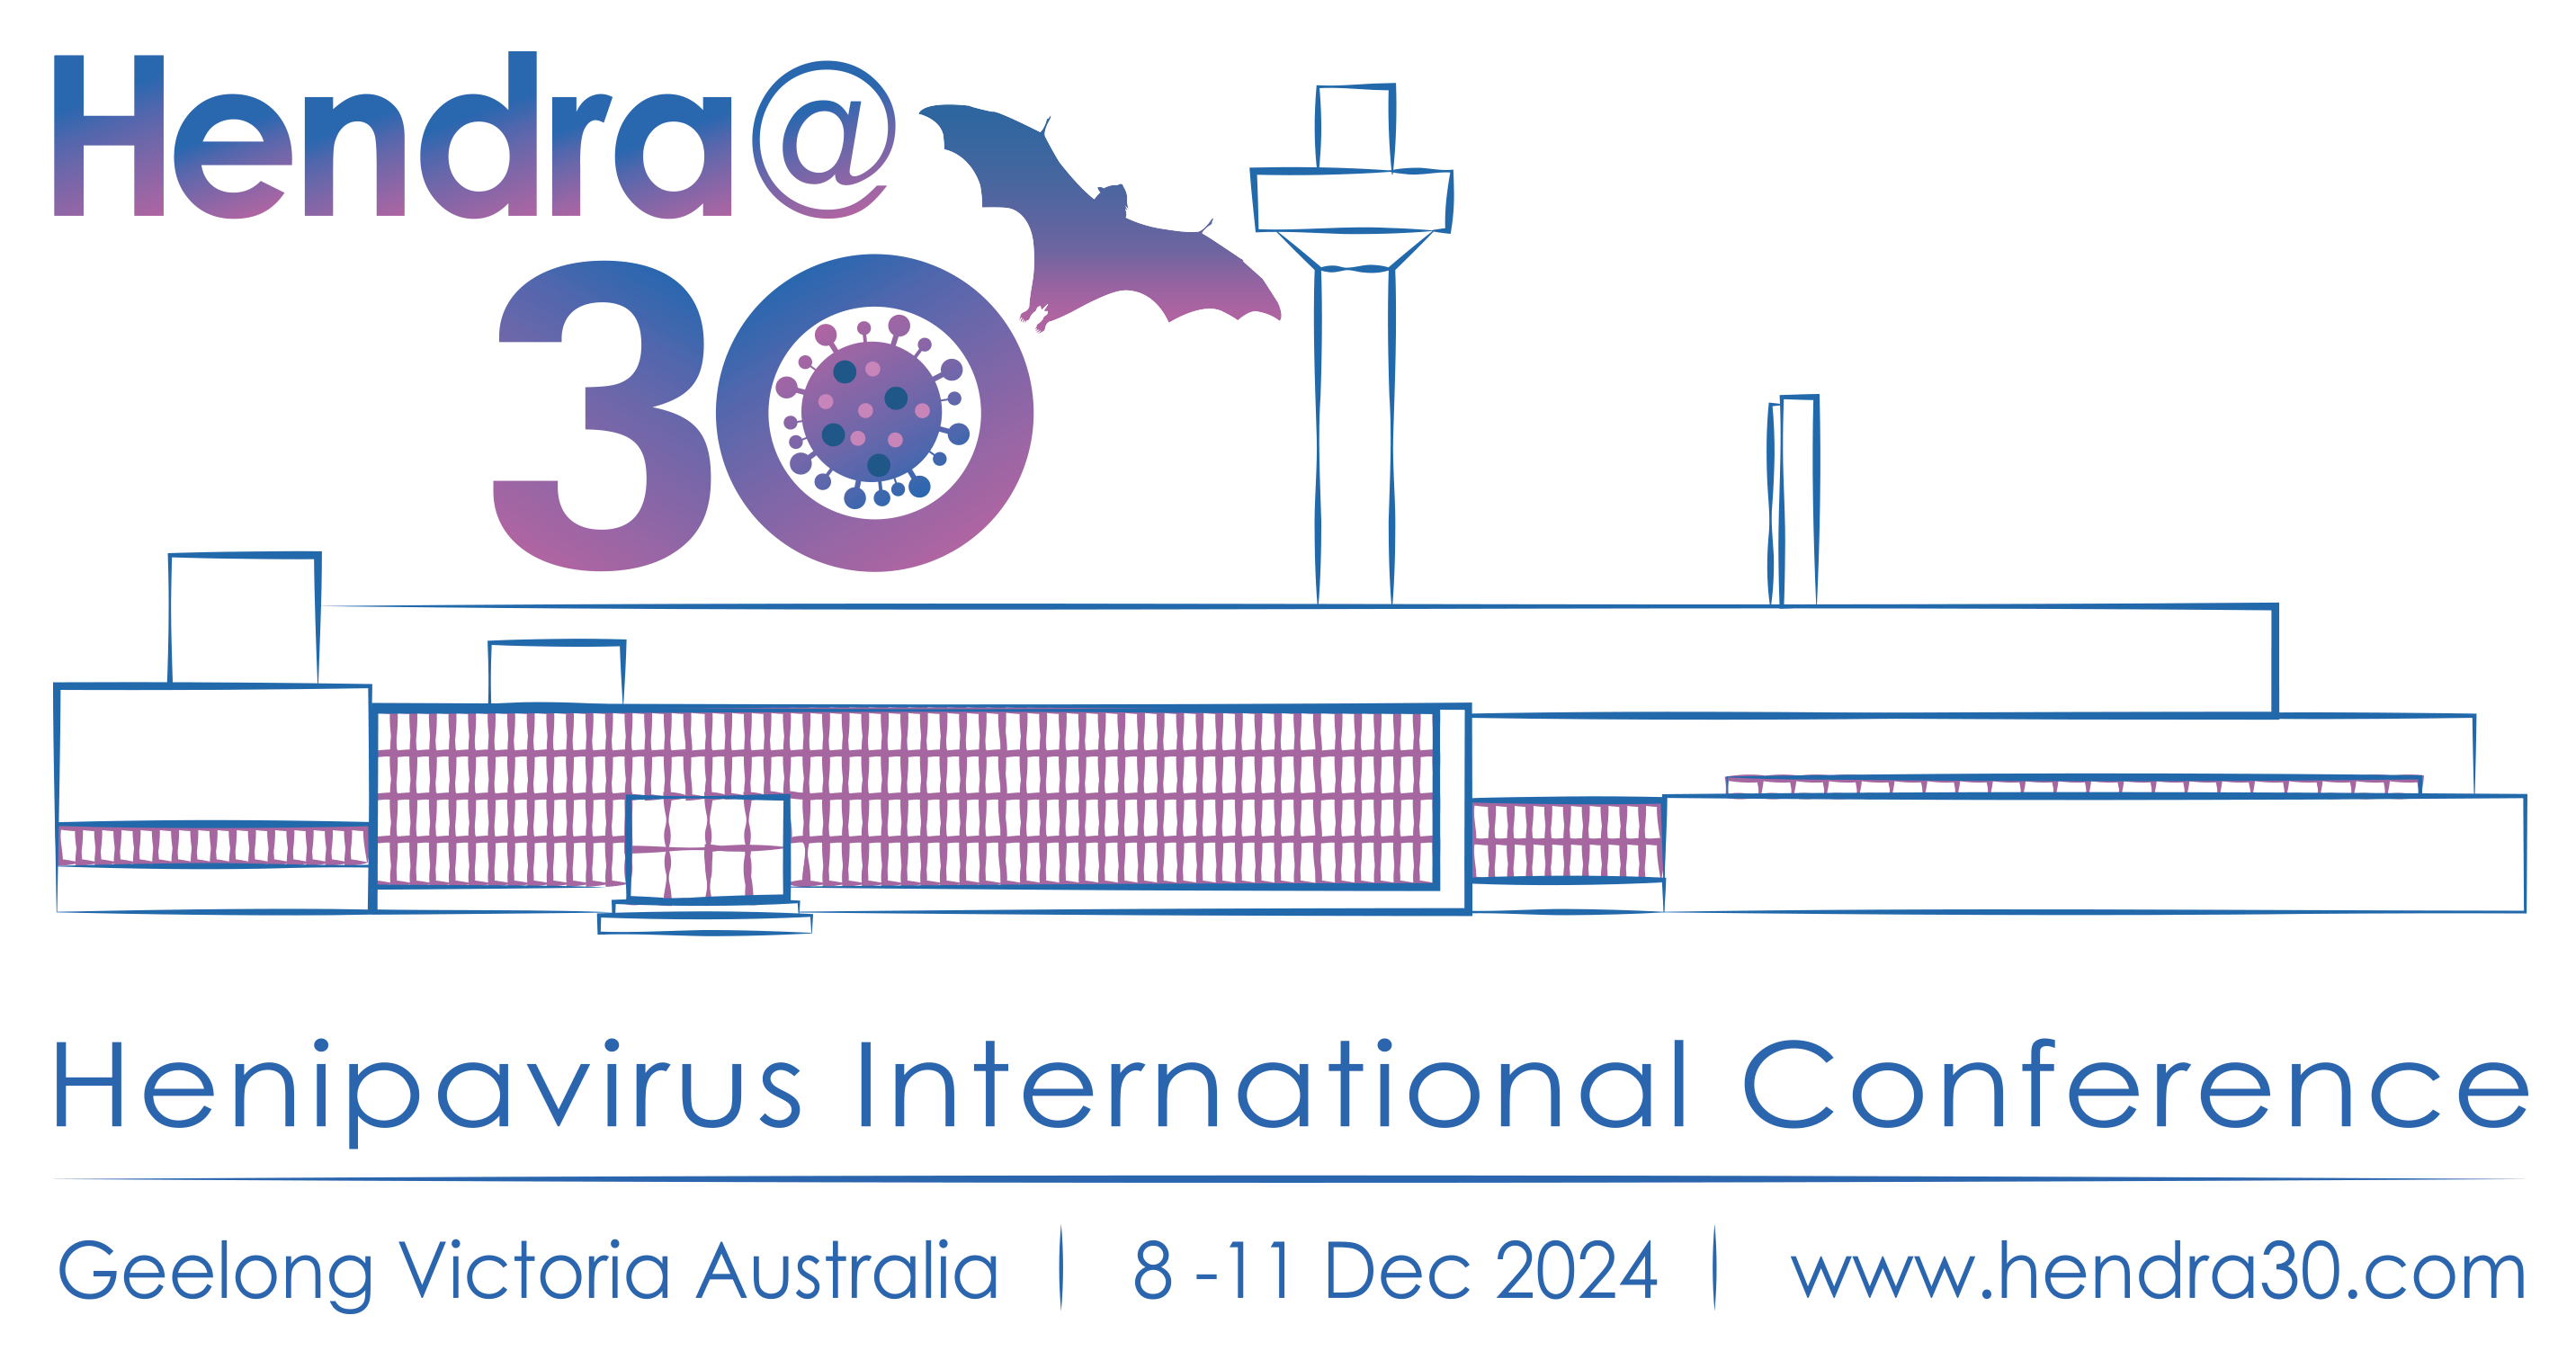 Hendra@30 infographic logo with title Henipavirus International Conference, the location Geelong, Victoria, Australia, and the date 8th - 11th of December 2024